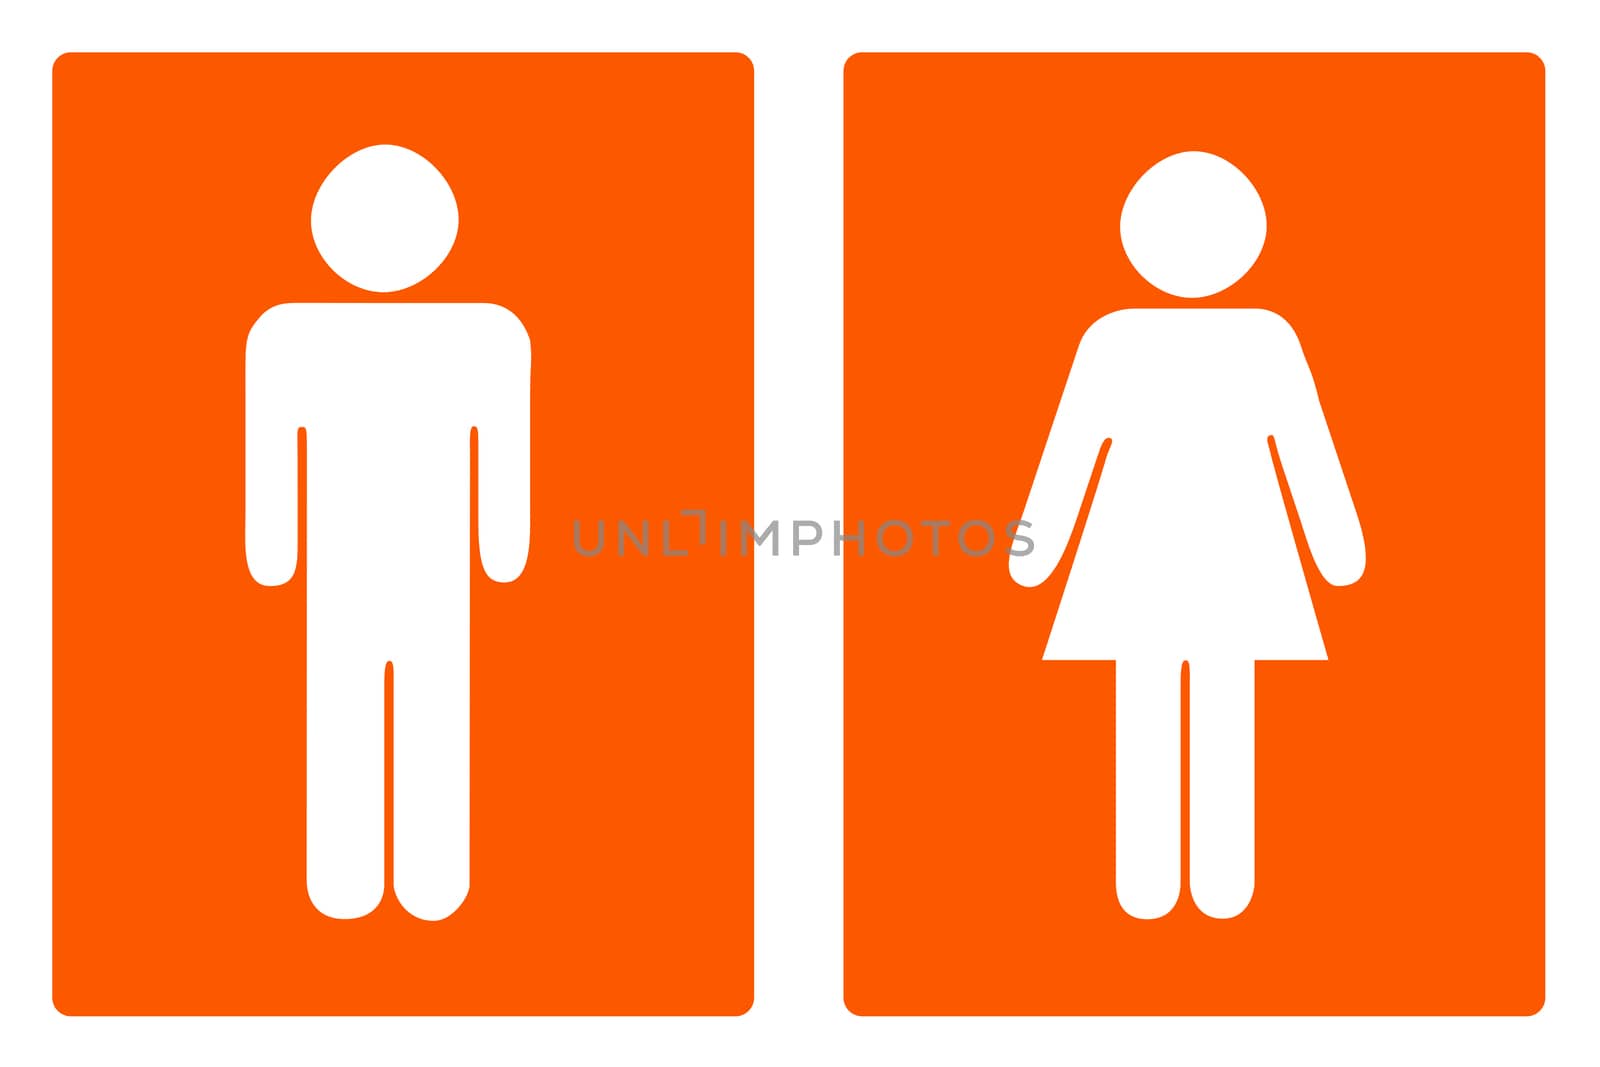 The sign for the toilet determining the sex of a person